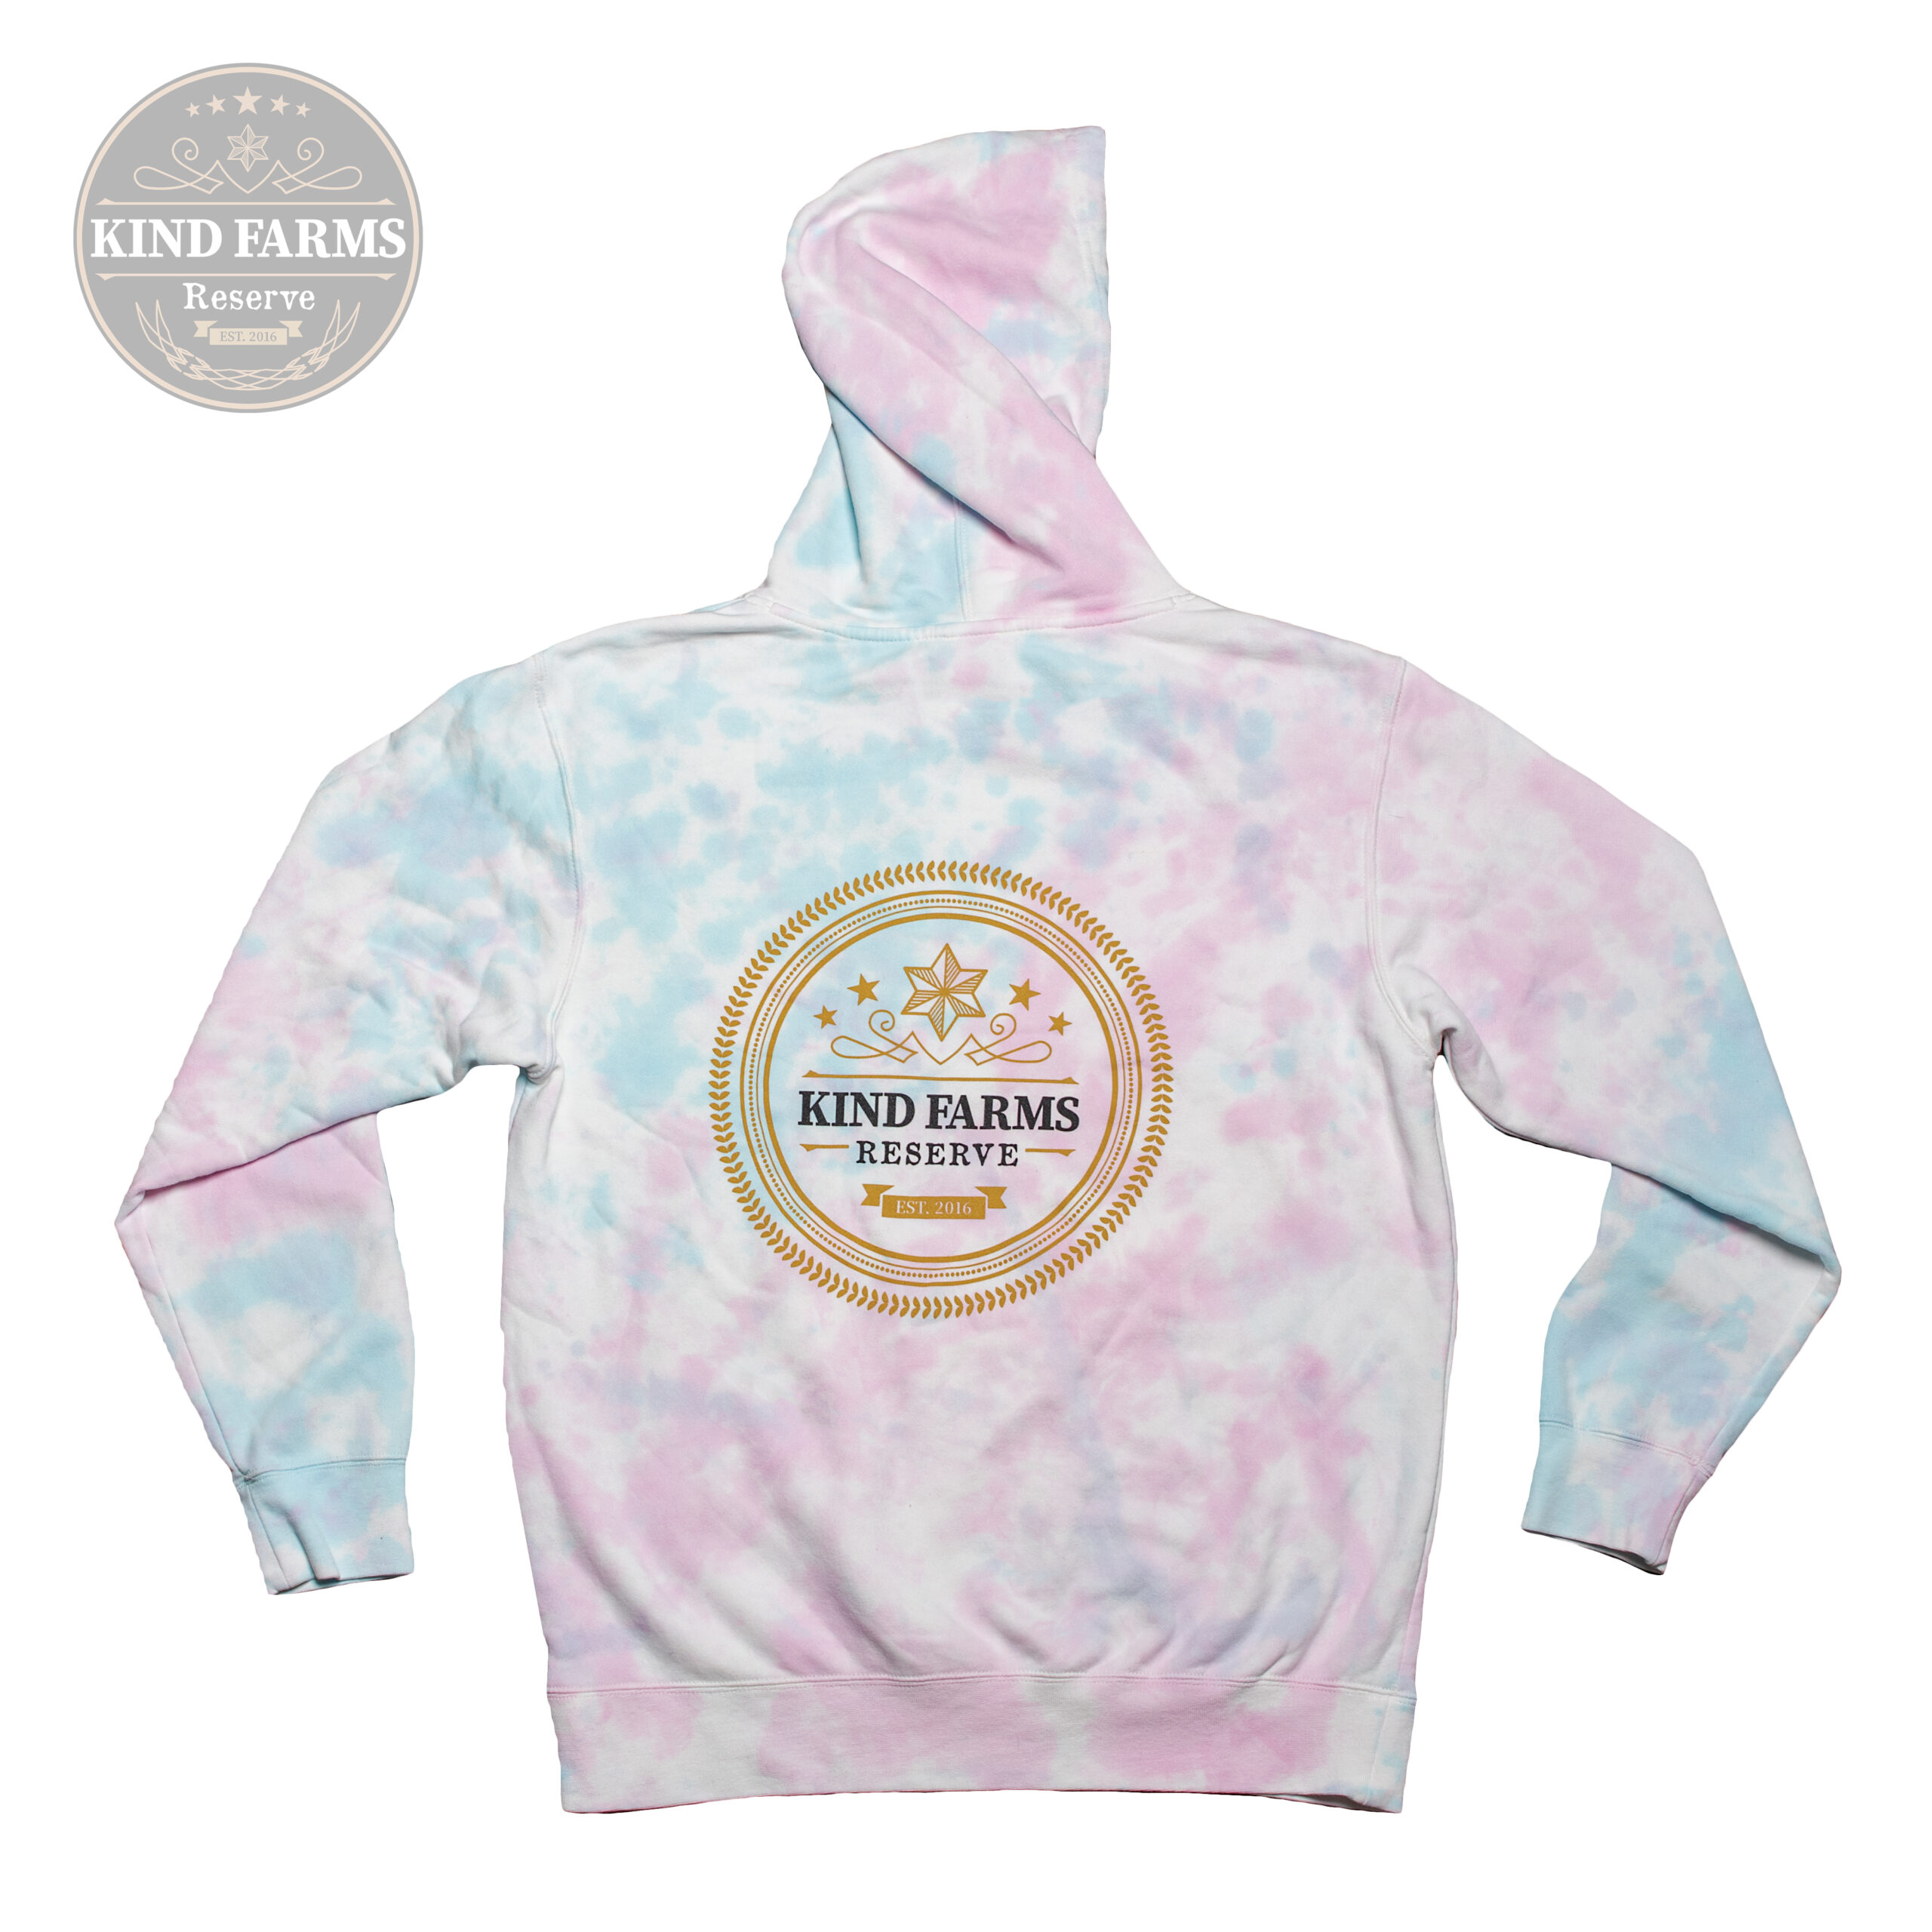 Kind Farms Reserve Tie-Dye Pullover Hoodie. – Midweight